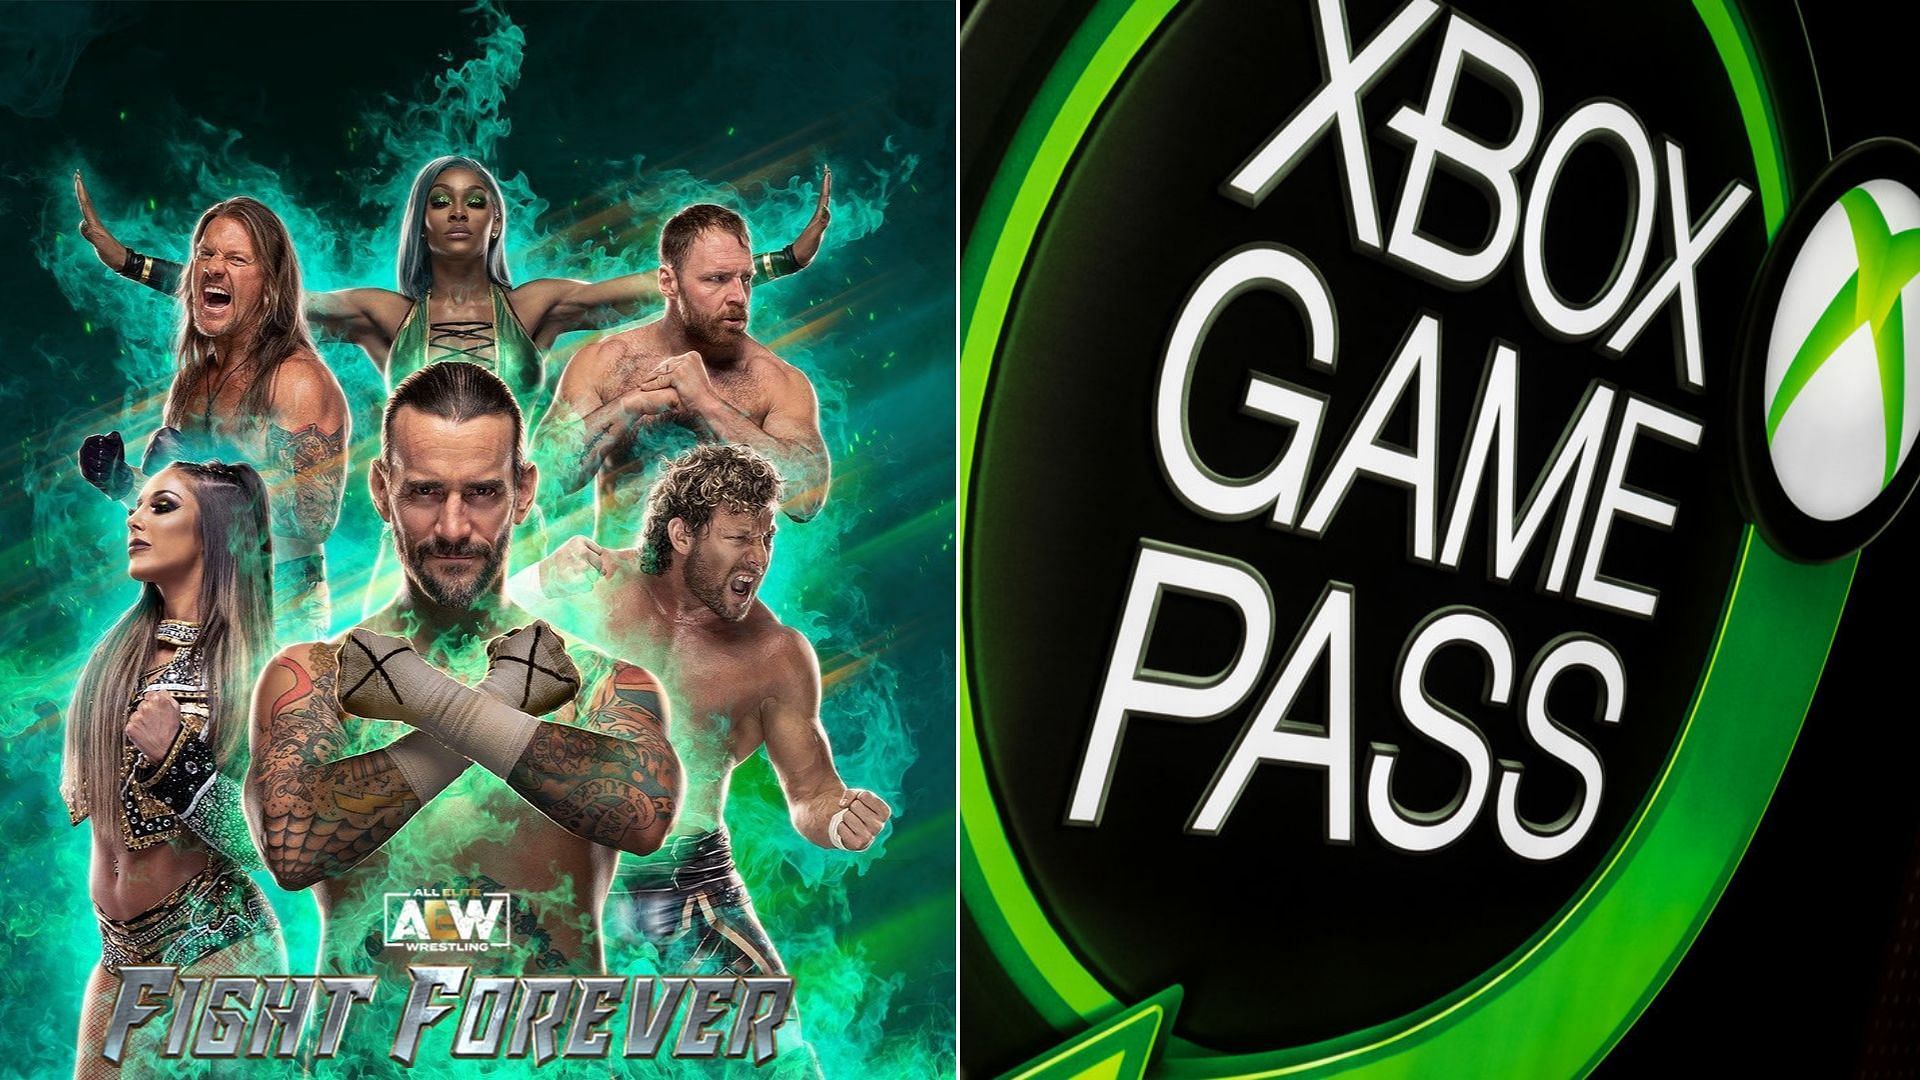 AEW: Fight Forever (left), XBox Game Pass (right)